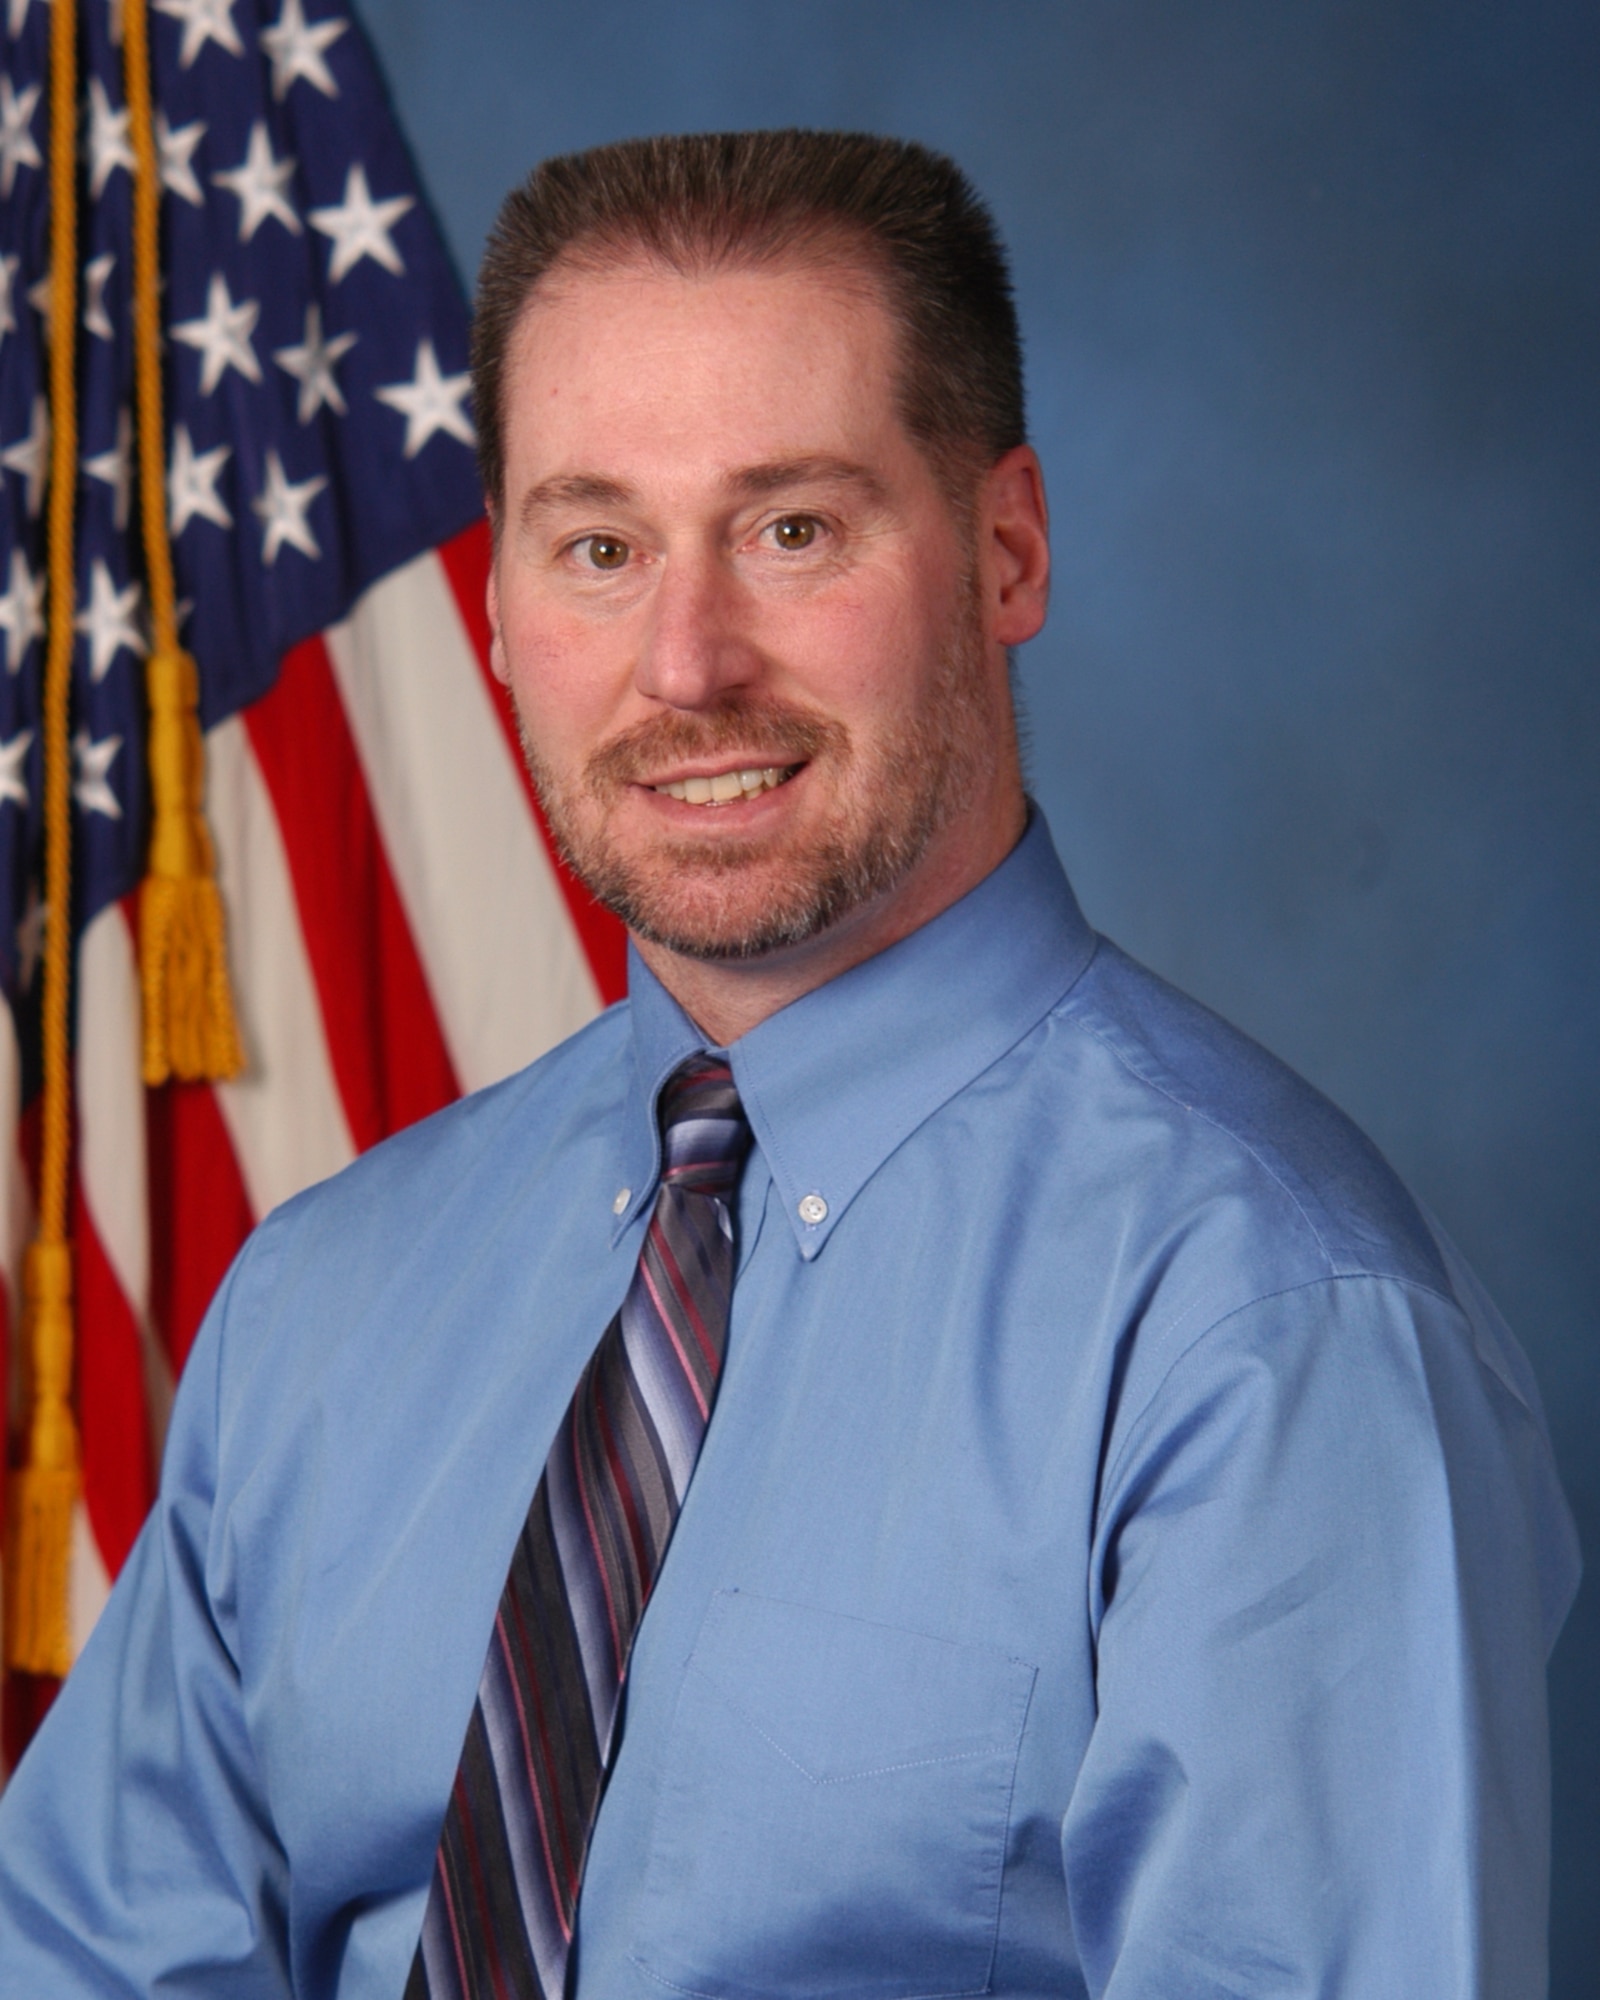 Grant D. Schaber served as the Air Force Operational Test and Evaluation Center Deputy Director of Operations from August 2007 until his death in January 2021 after battling cancer.